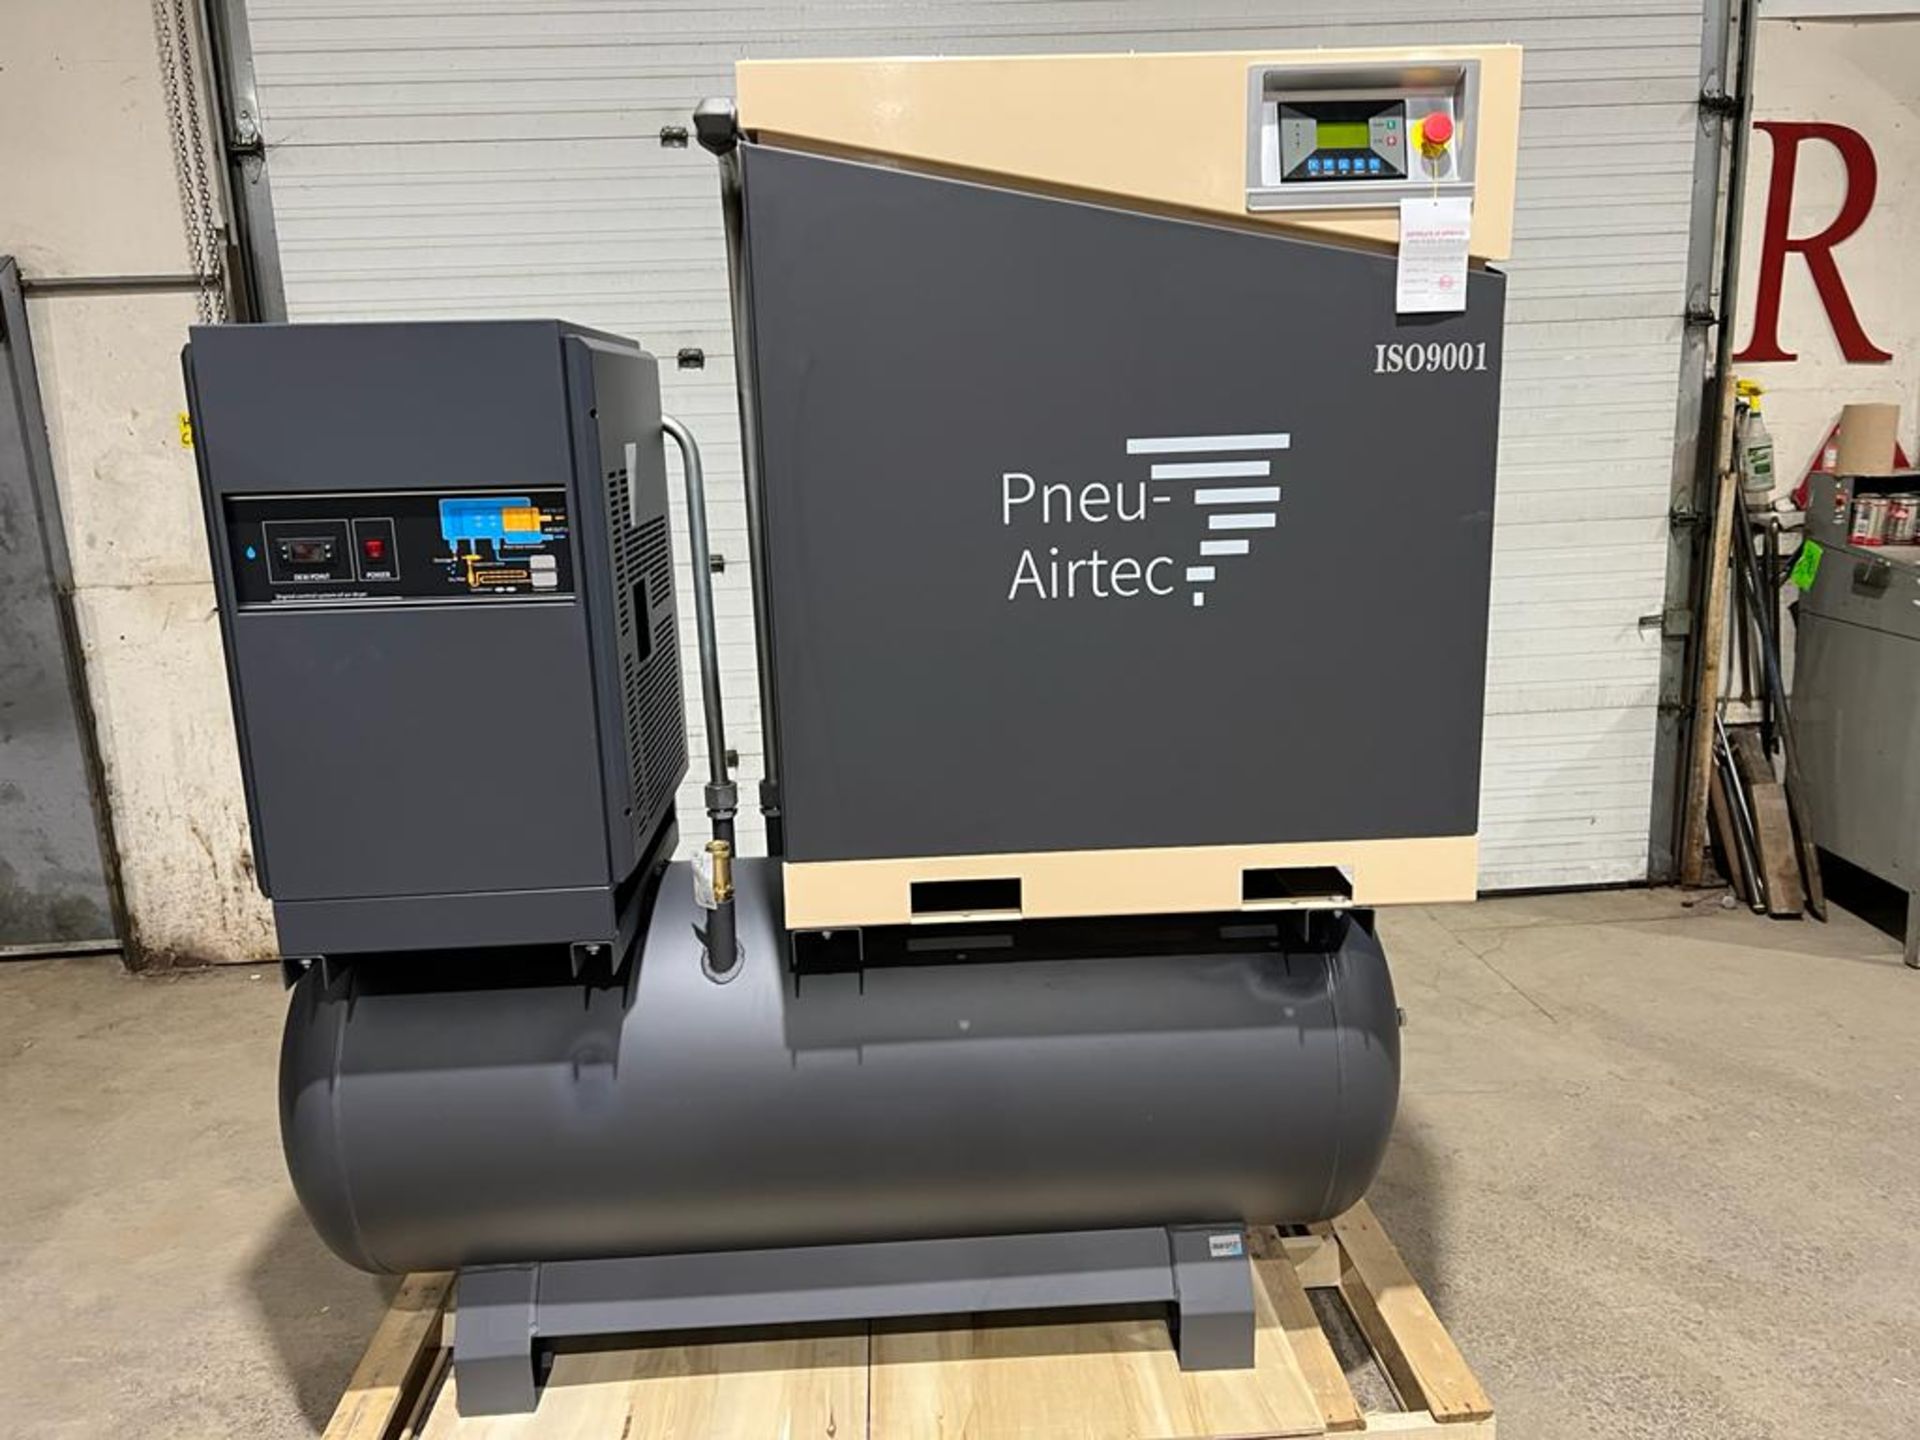 Pneu-Airtec model 30FF - 30HP Air Compressor with built on DRYER - MINT UNUSED COMPRESSOR with - Image 2 of 4